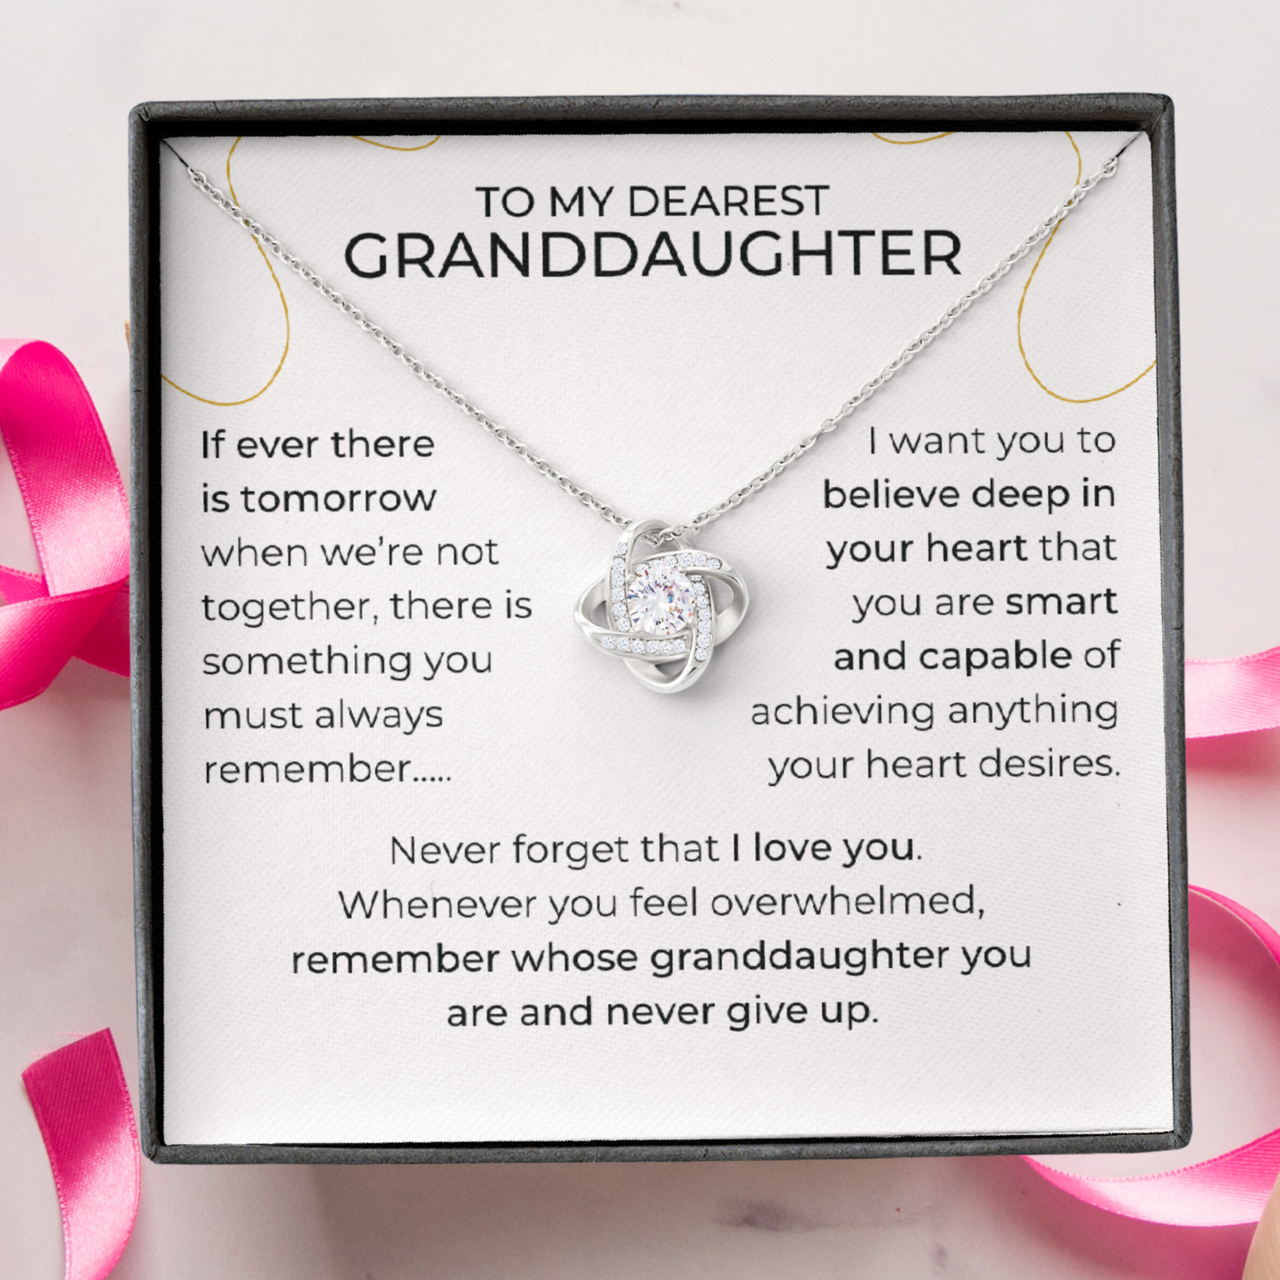 Granddaughter, Believe - Love Knot Necklace